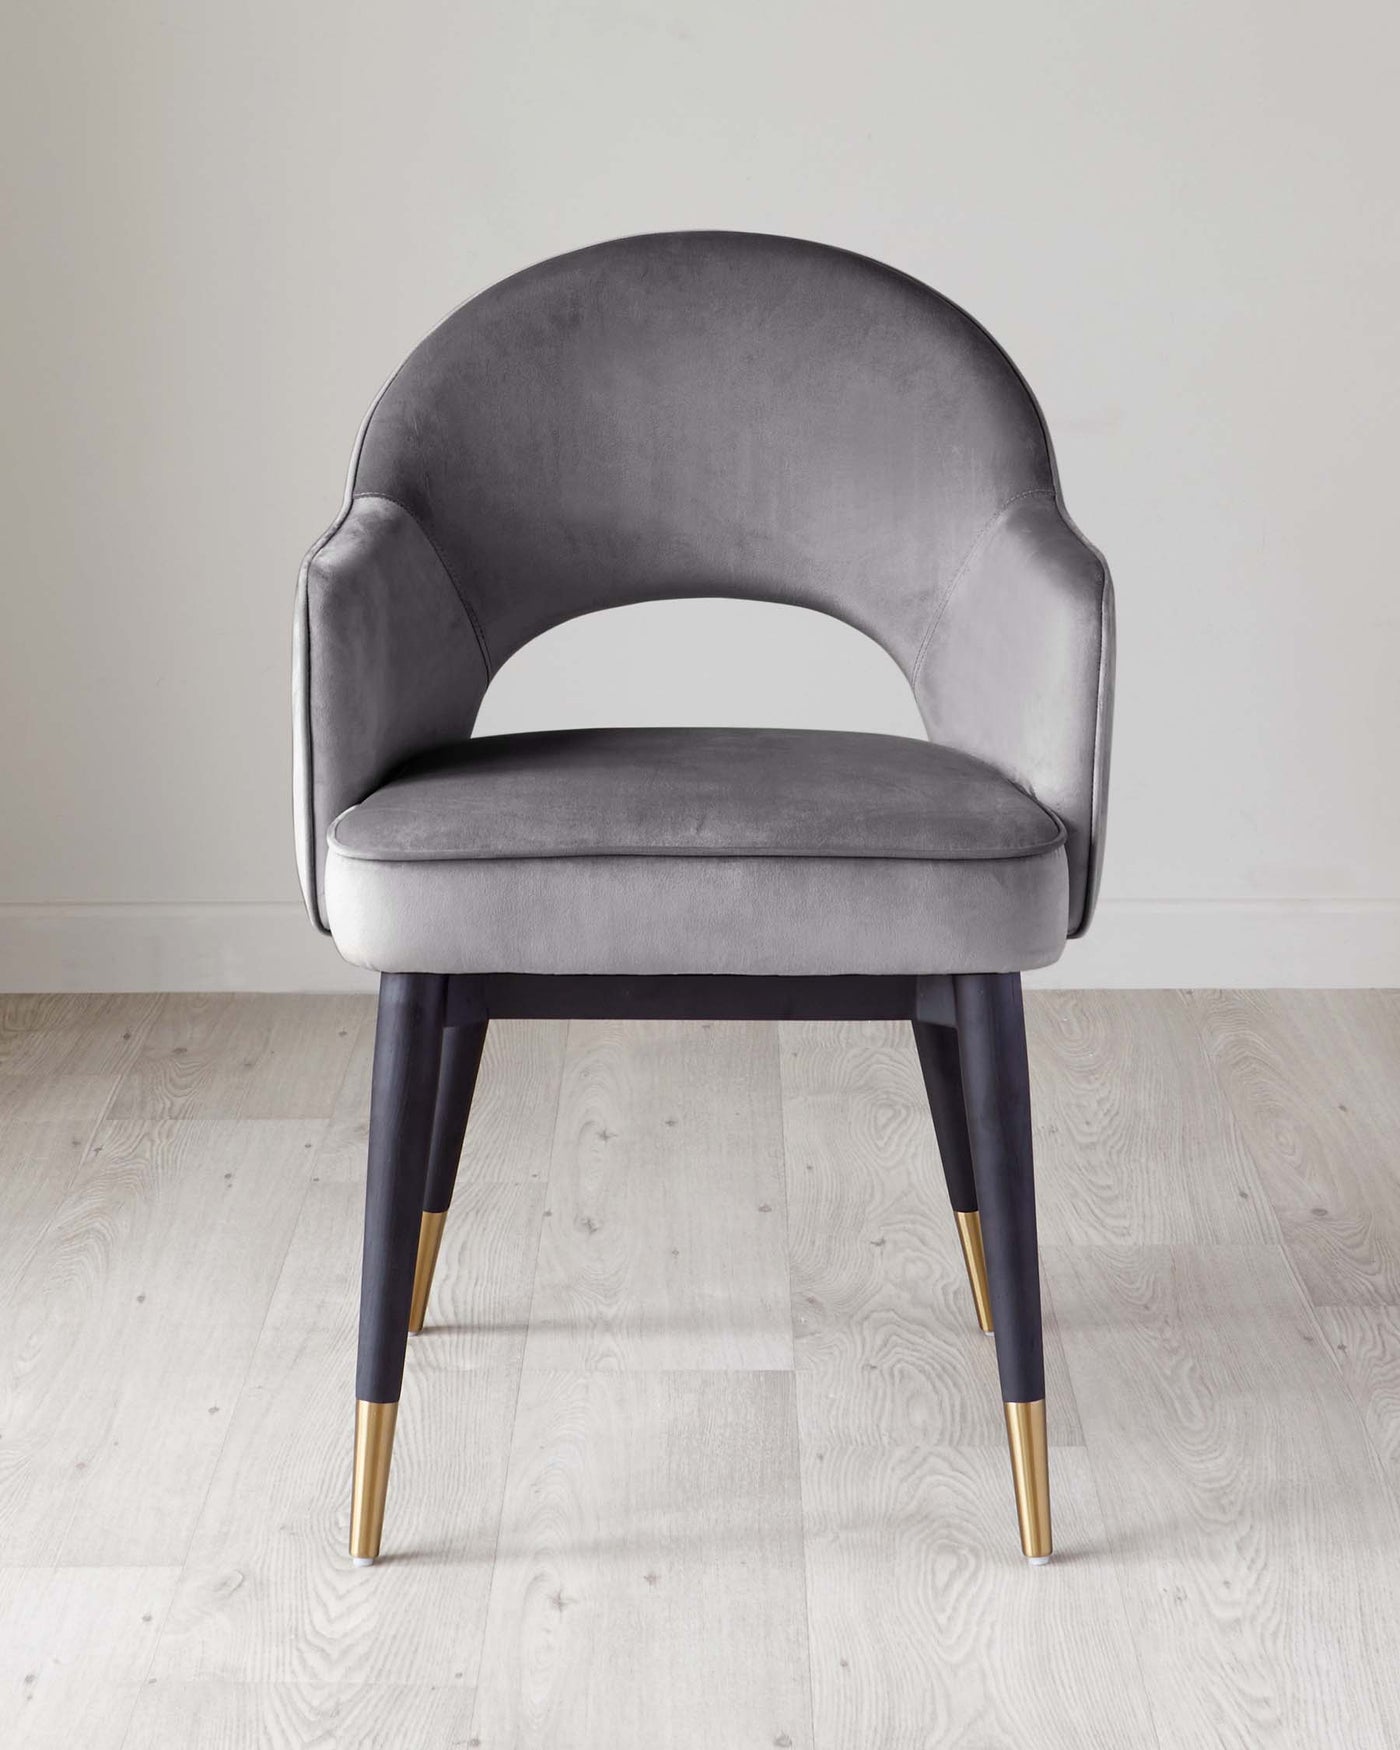 Elegant modern chair with a curved backrest and plush grey velvet upholstery, featuring black tapered legs with gold-toned tips, against a light wooden floor and a pale background.